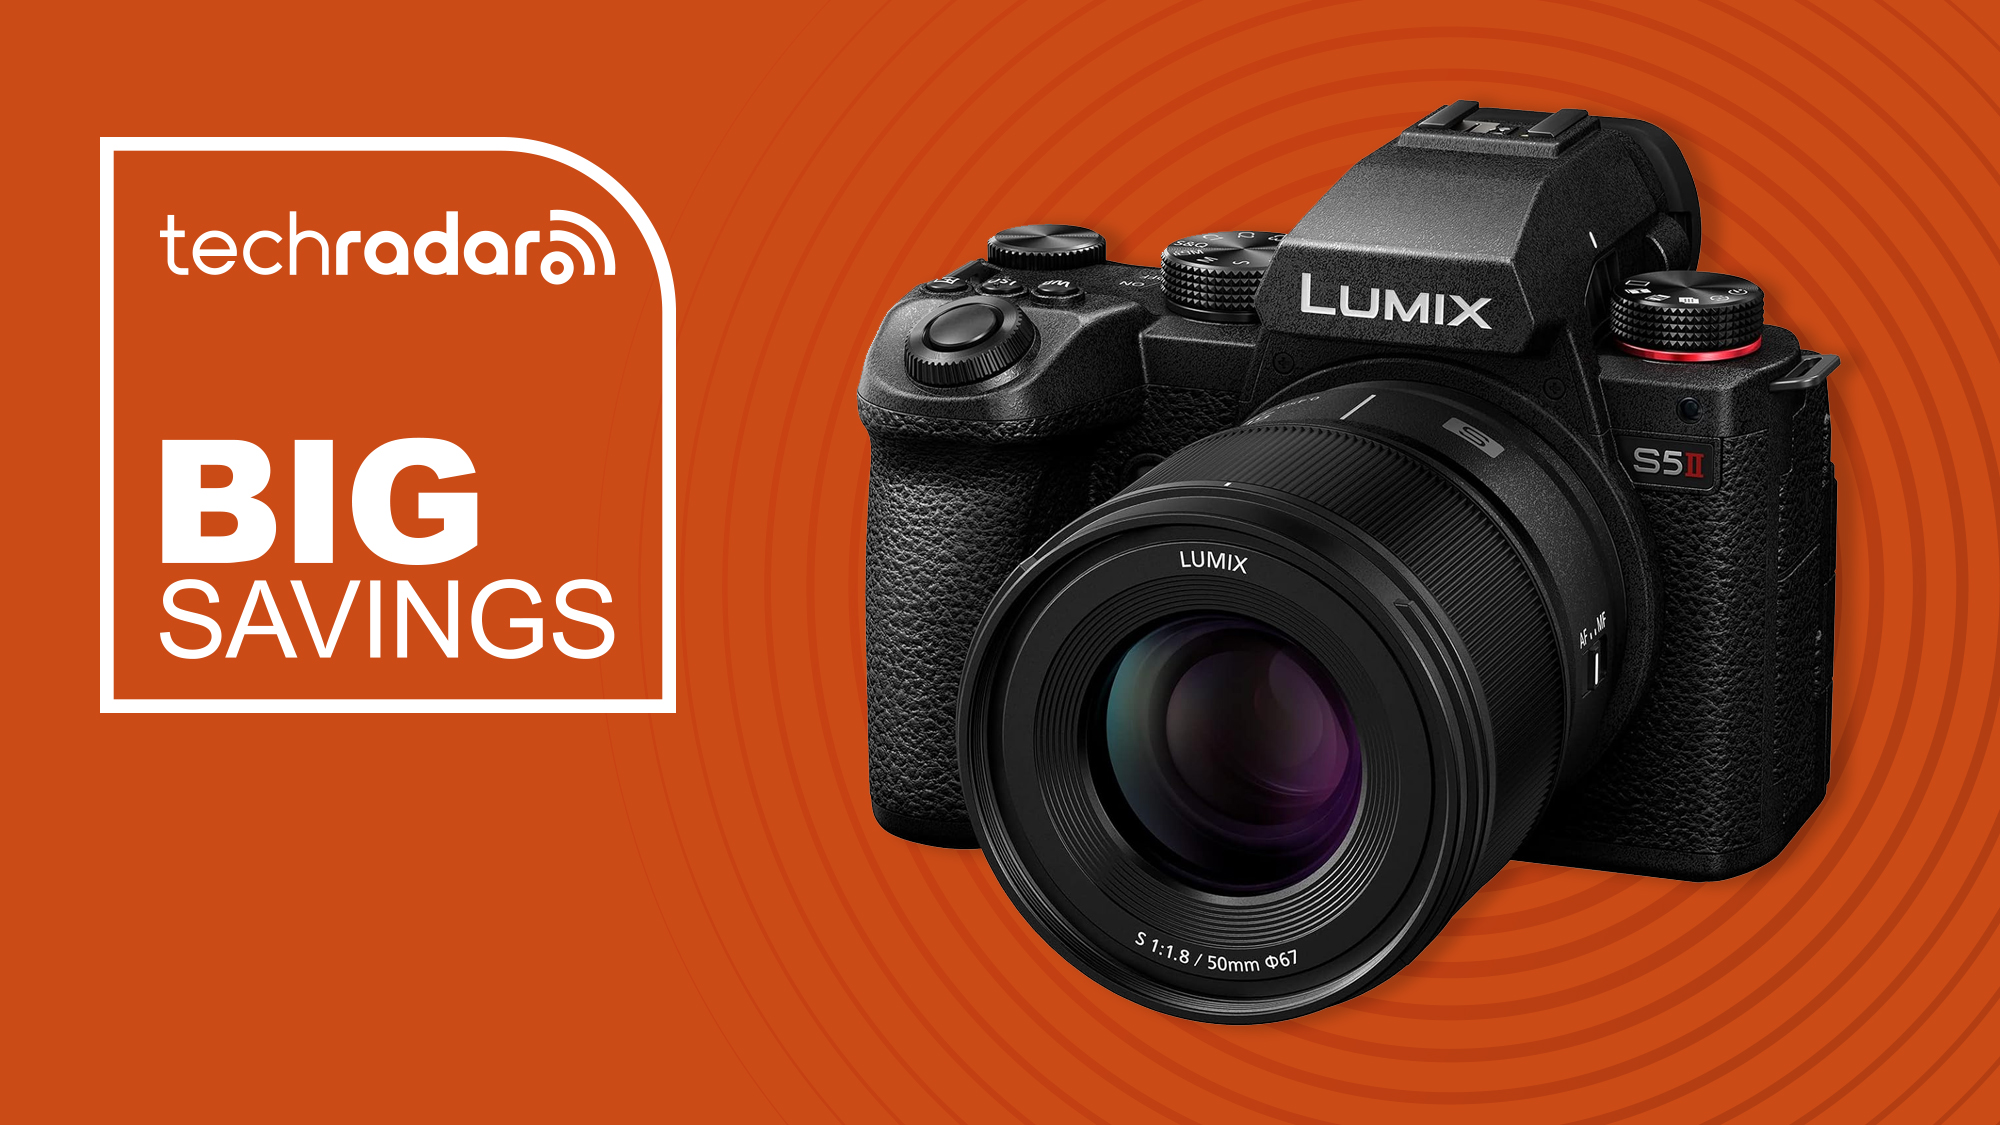 This Panasonic Lumix S5 II deal makes it an unmissable Christmas bargain